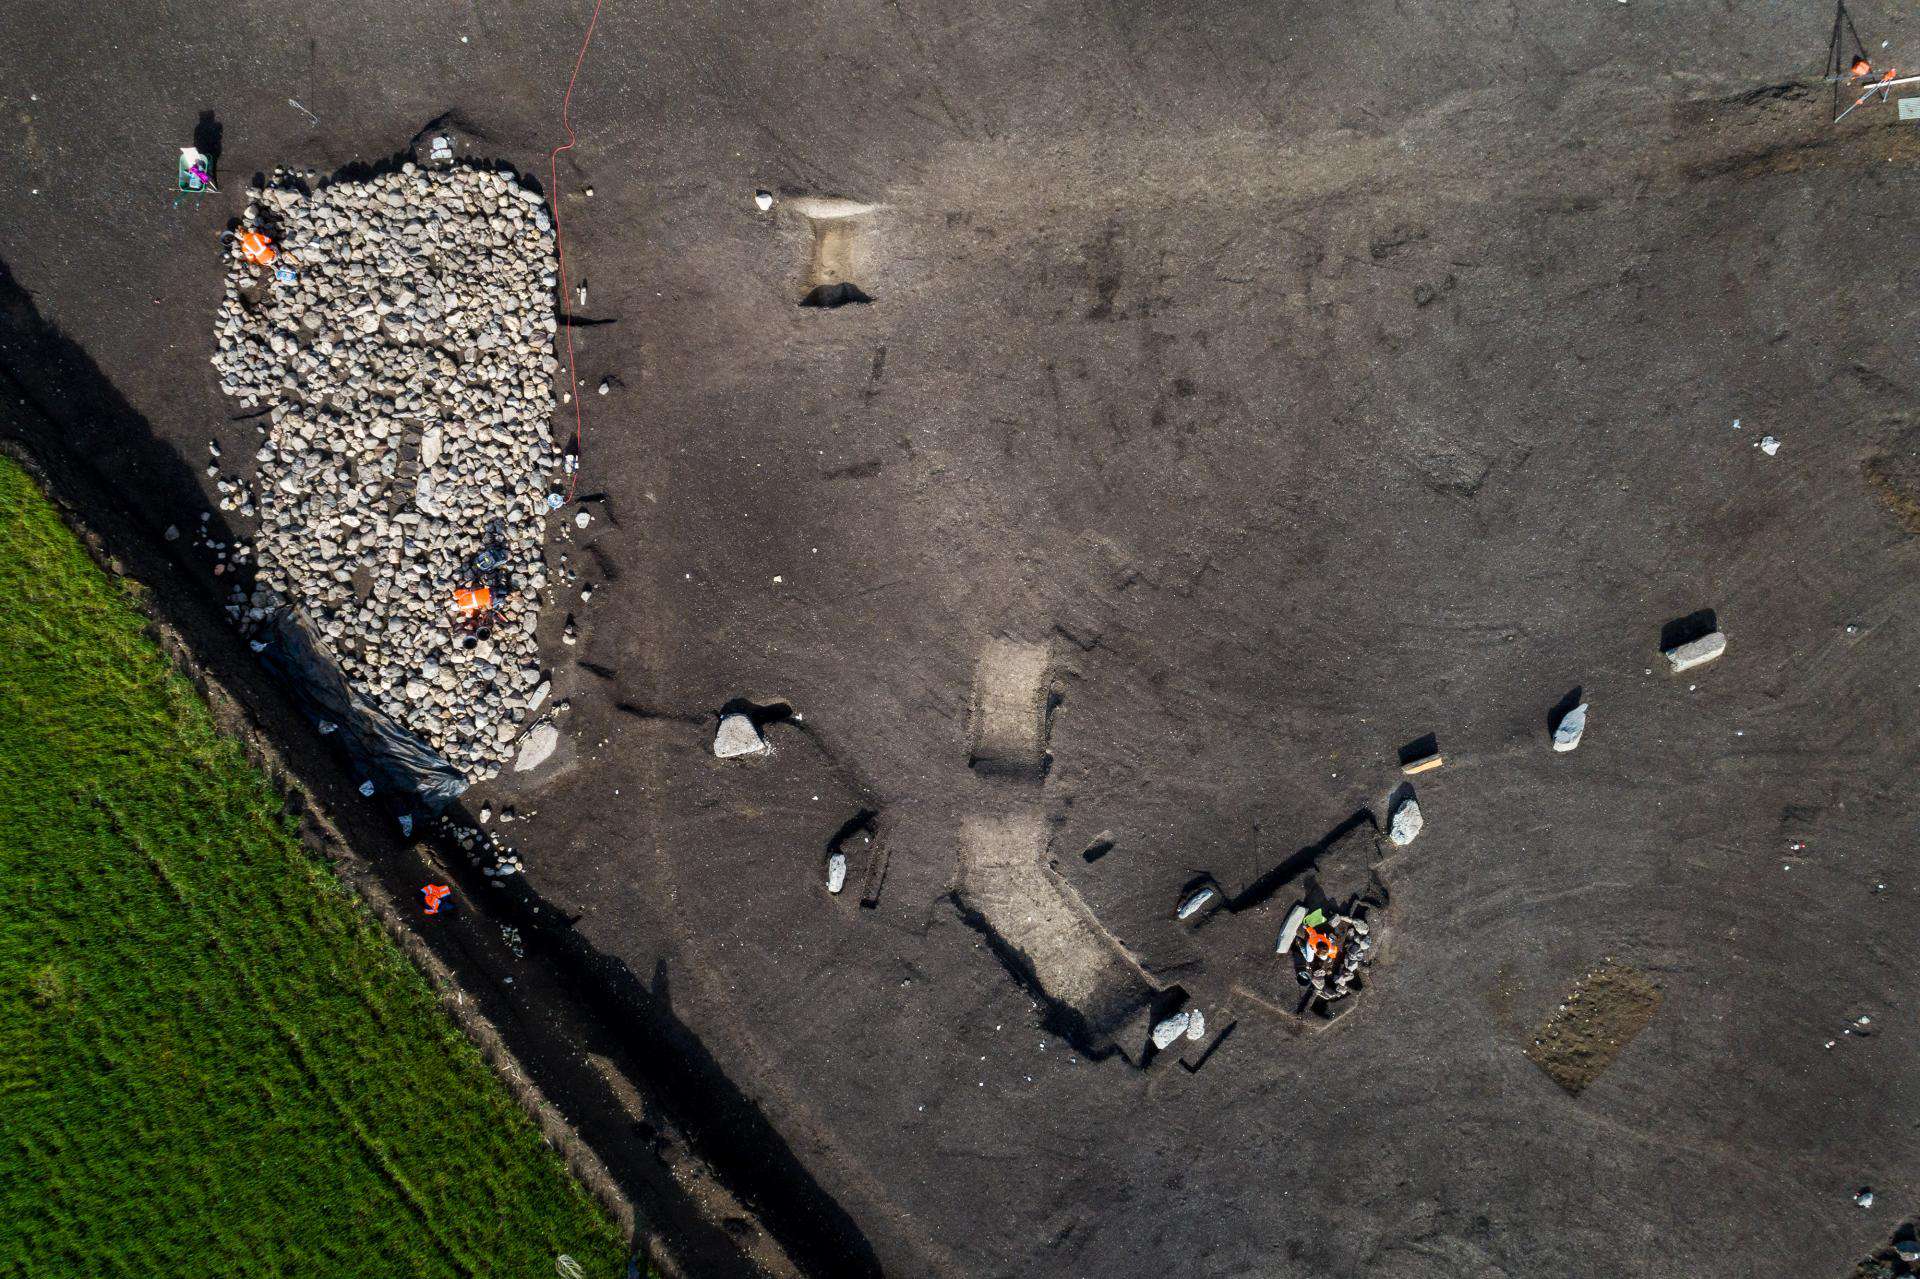 dji - Prehistoric monoliths found in central France for the first time